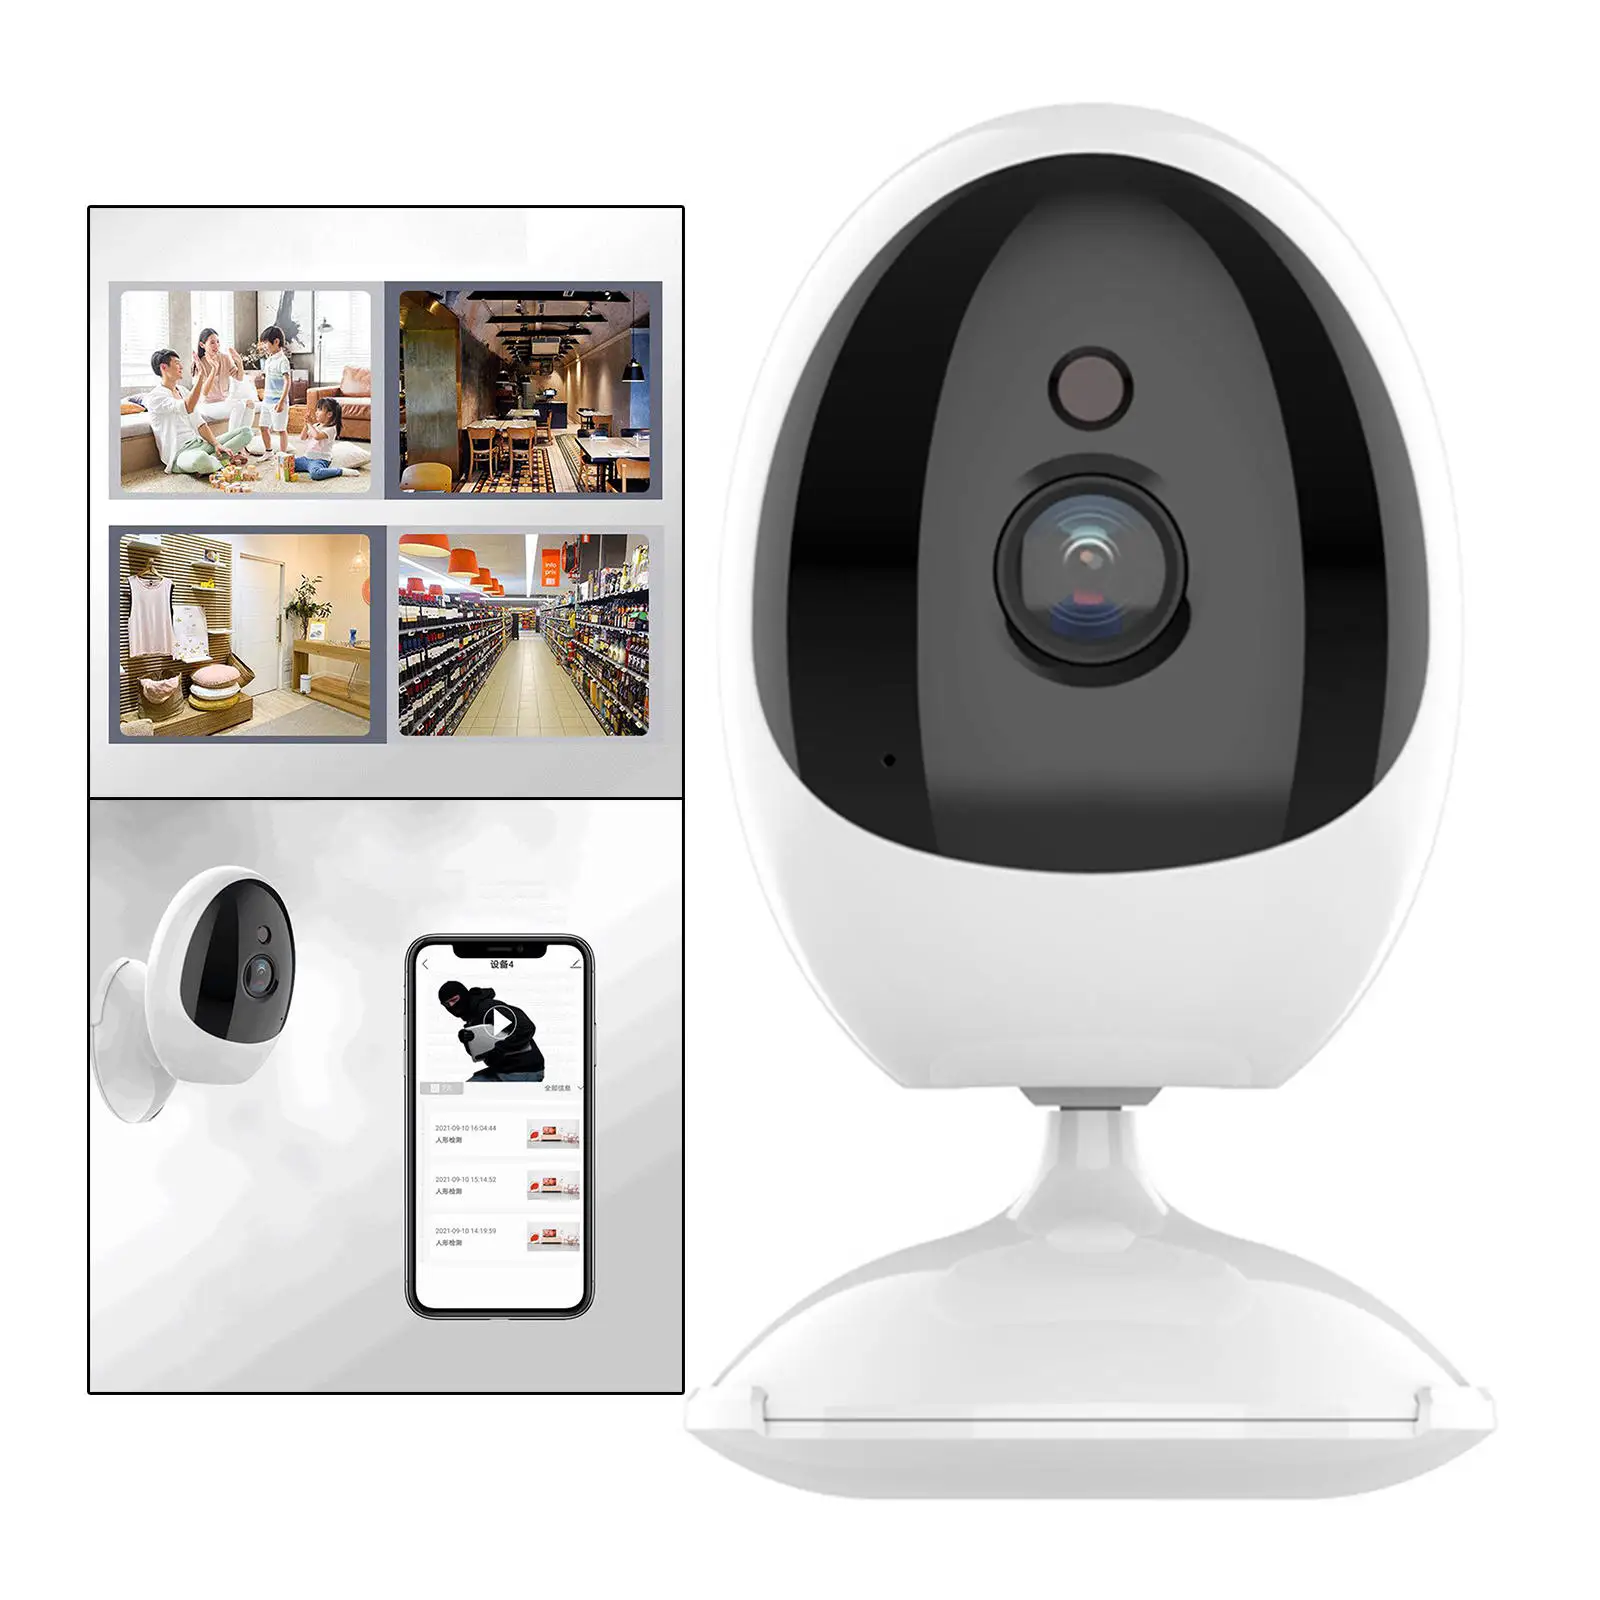 1080P WiFi Security Camera Indoor Plug-Uk with Phone App Night View Cloud Storage Remote Control Easy to Set up for Bedroom